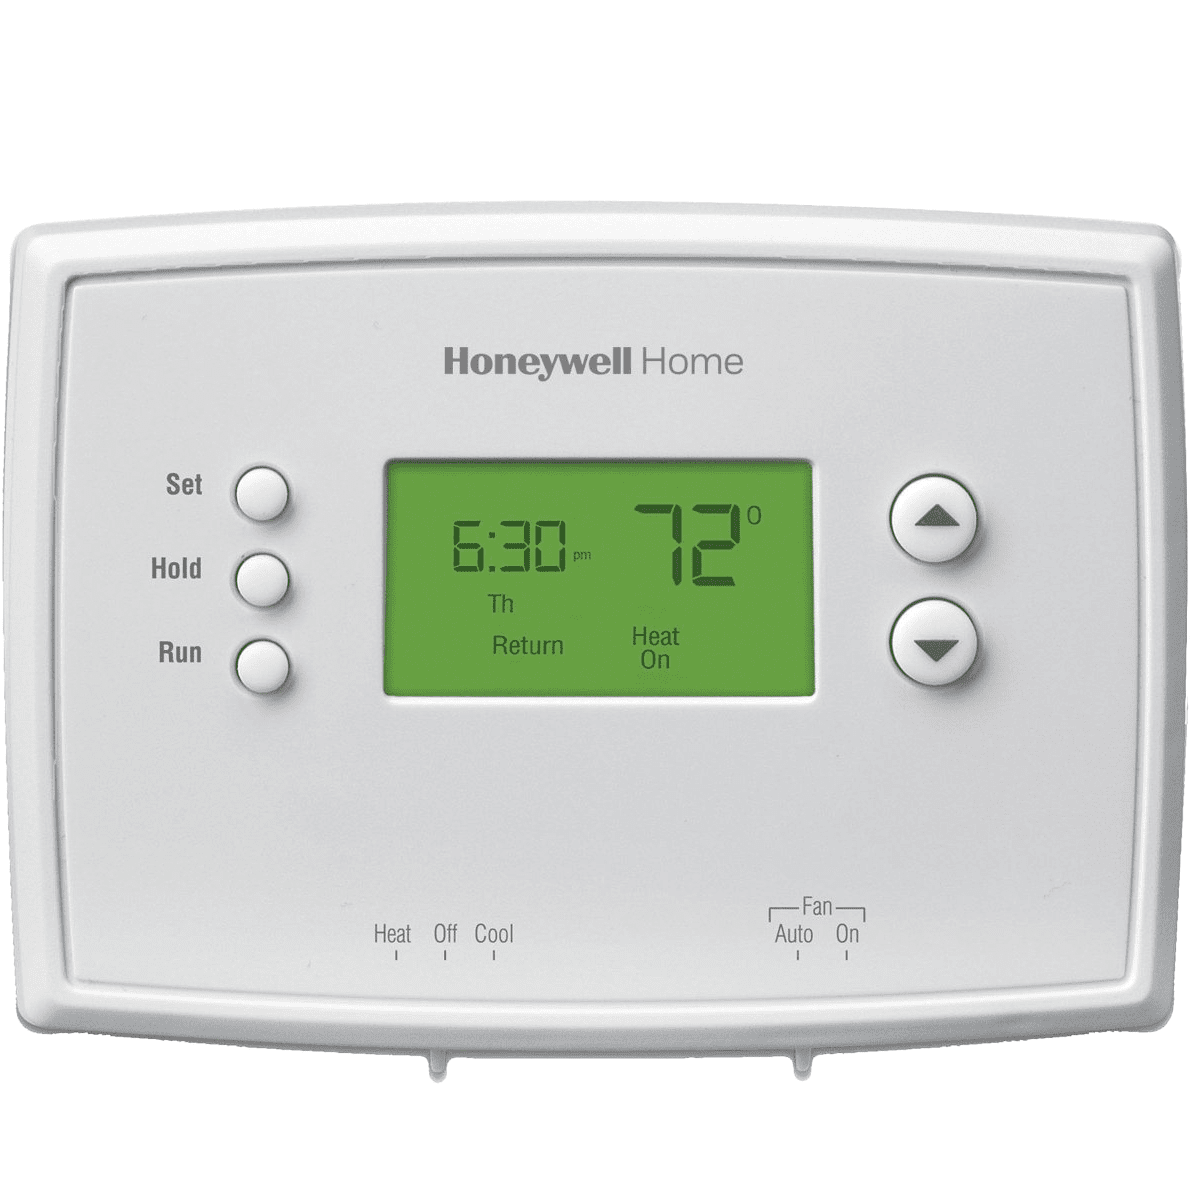 Honeywell Home RTH2300B 5-2-Day Programmable Thermostat